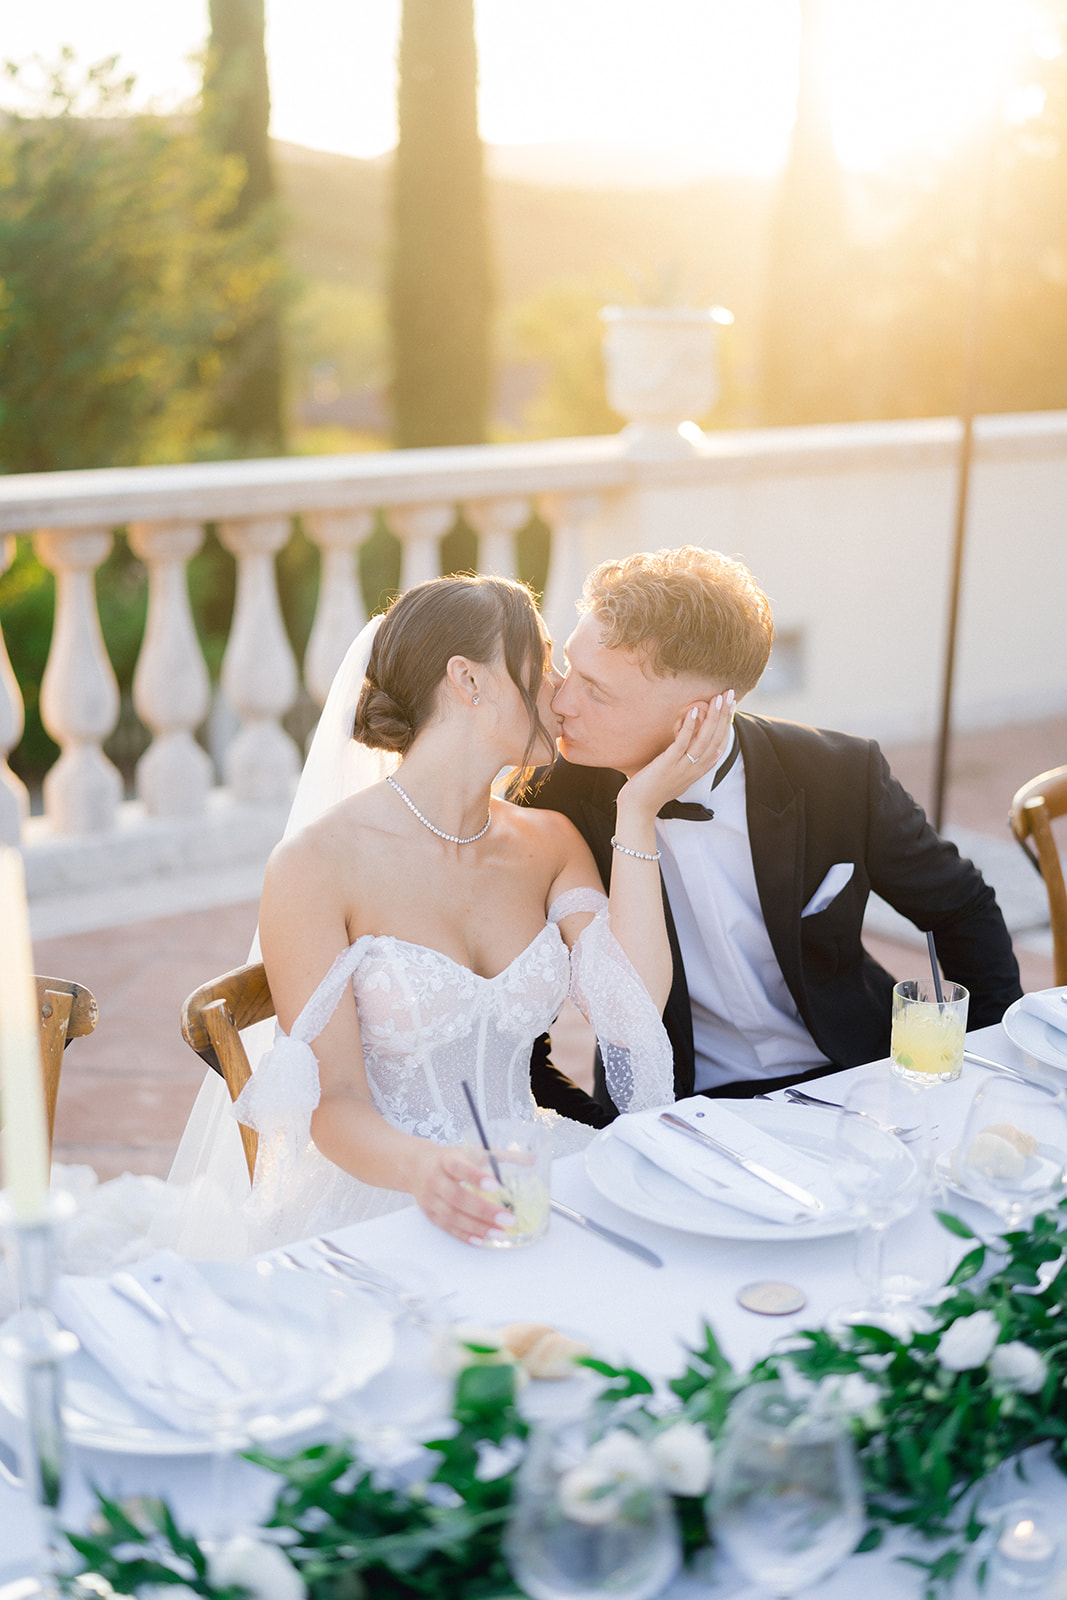 The iconic kiss of Georgia and Tom at the imperial table during their wedding dinner in Tuscany